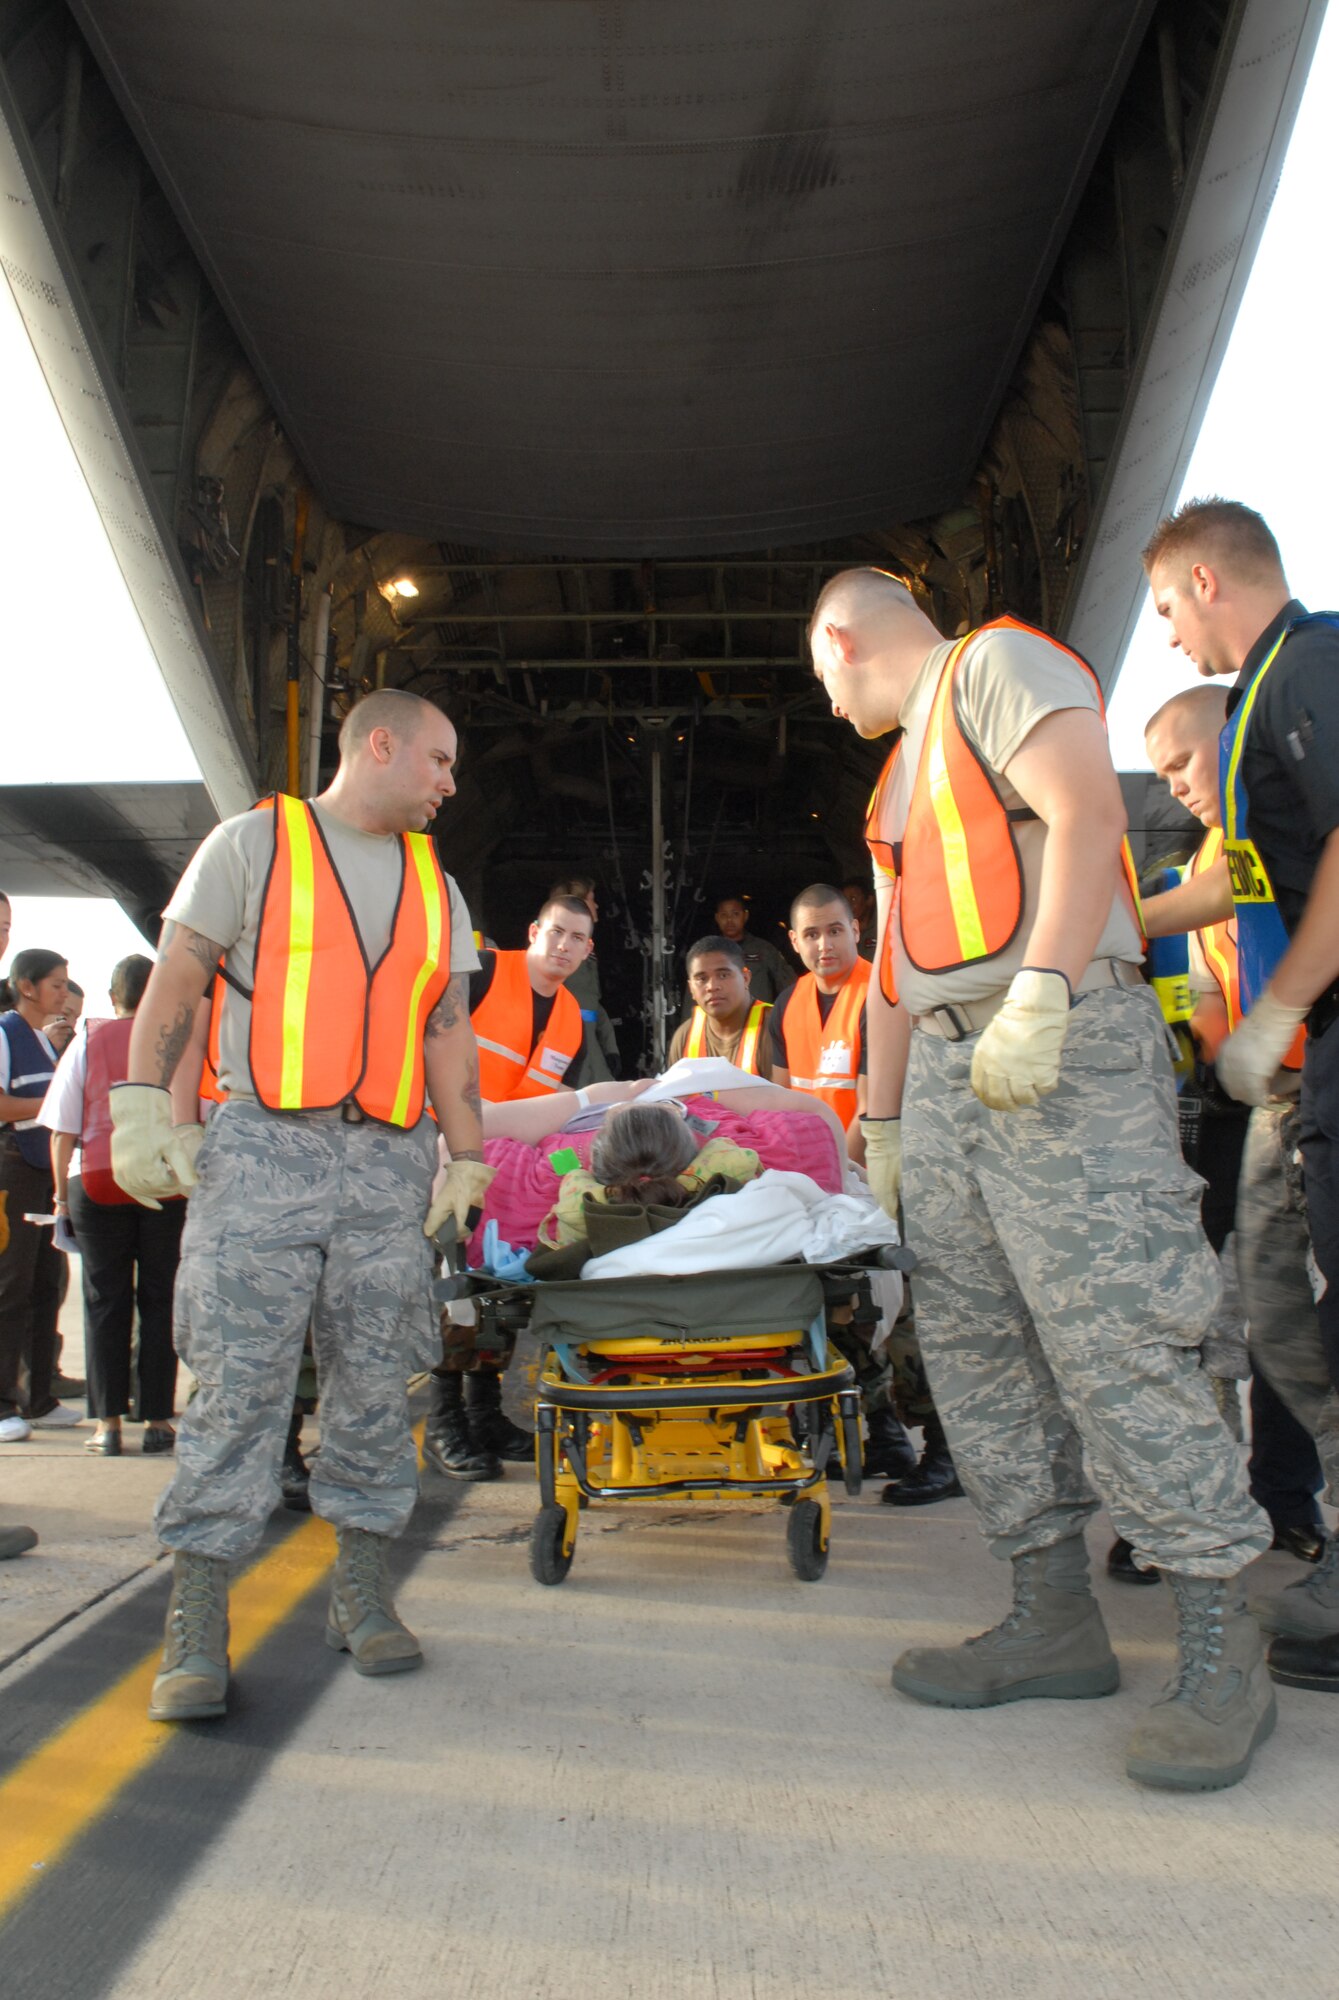 LACKLAND AIR FORCE BASE, Texas -- U.S. Air Force Airmen from the 37th and 59th Air Wing unload hospital patients that were evacuated from Beaumont, Texas, September 12, 2008. These patients were transported by a combined effort from the Little Rock Air Force Base C-130 aircraft and crews and the 908th Aero medical Evacuation Squadron, Scott Air Force Base, IL in preparation for Hurricane Ike's landfall in southern Texas.  (U.S. Air Force photo by Staff Sgt. Chris Willis) (RELEASED)